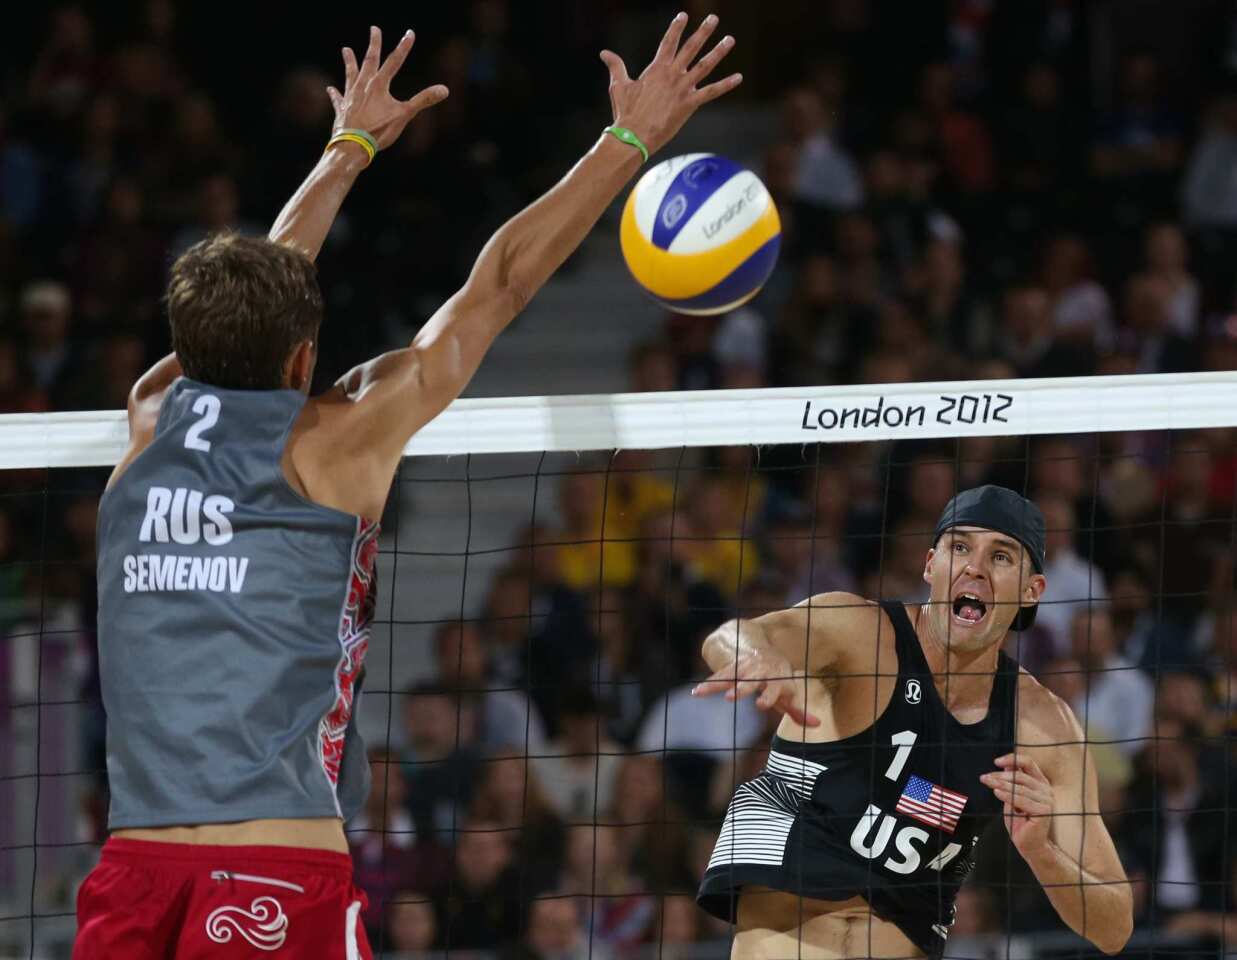 Jake Gibb, right, of the United States spikes the ball past Russia's Konstantin Semenov during the beach volleyball match.